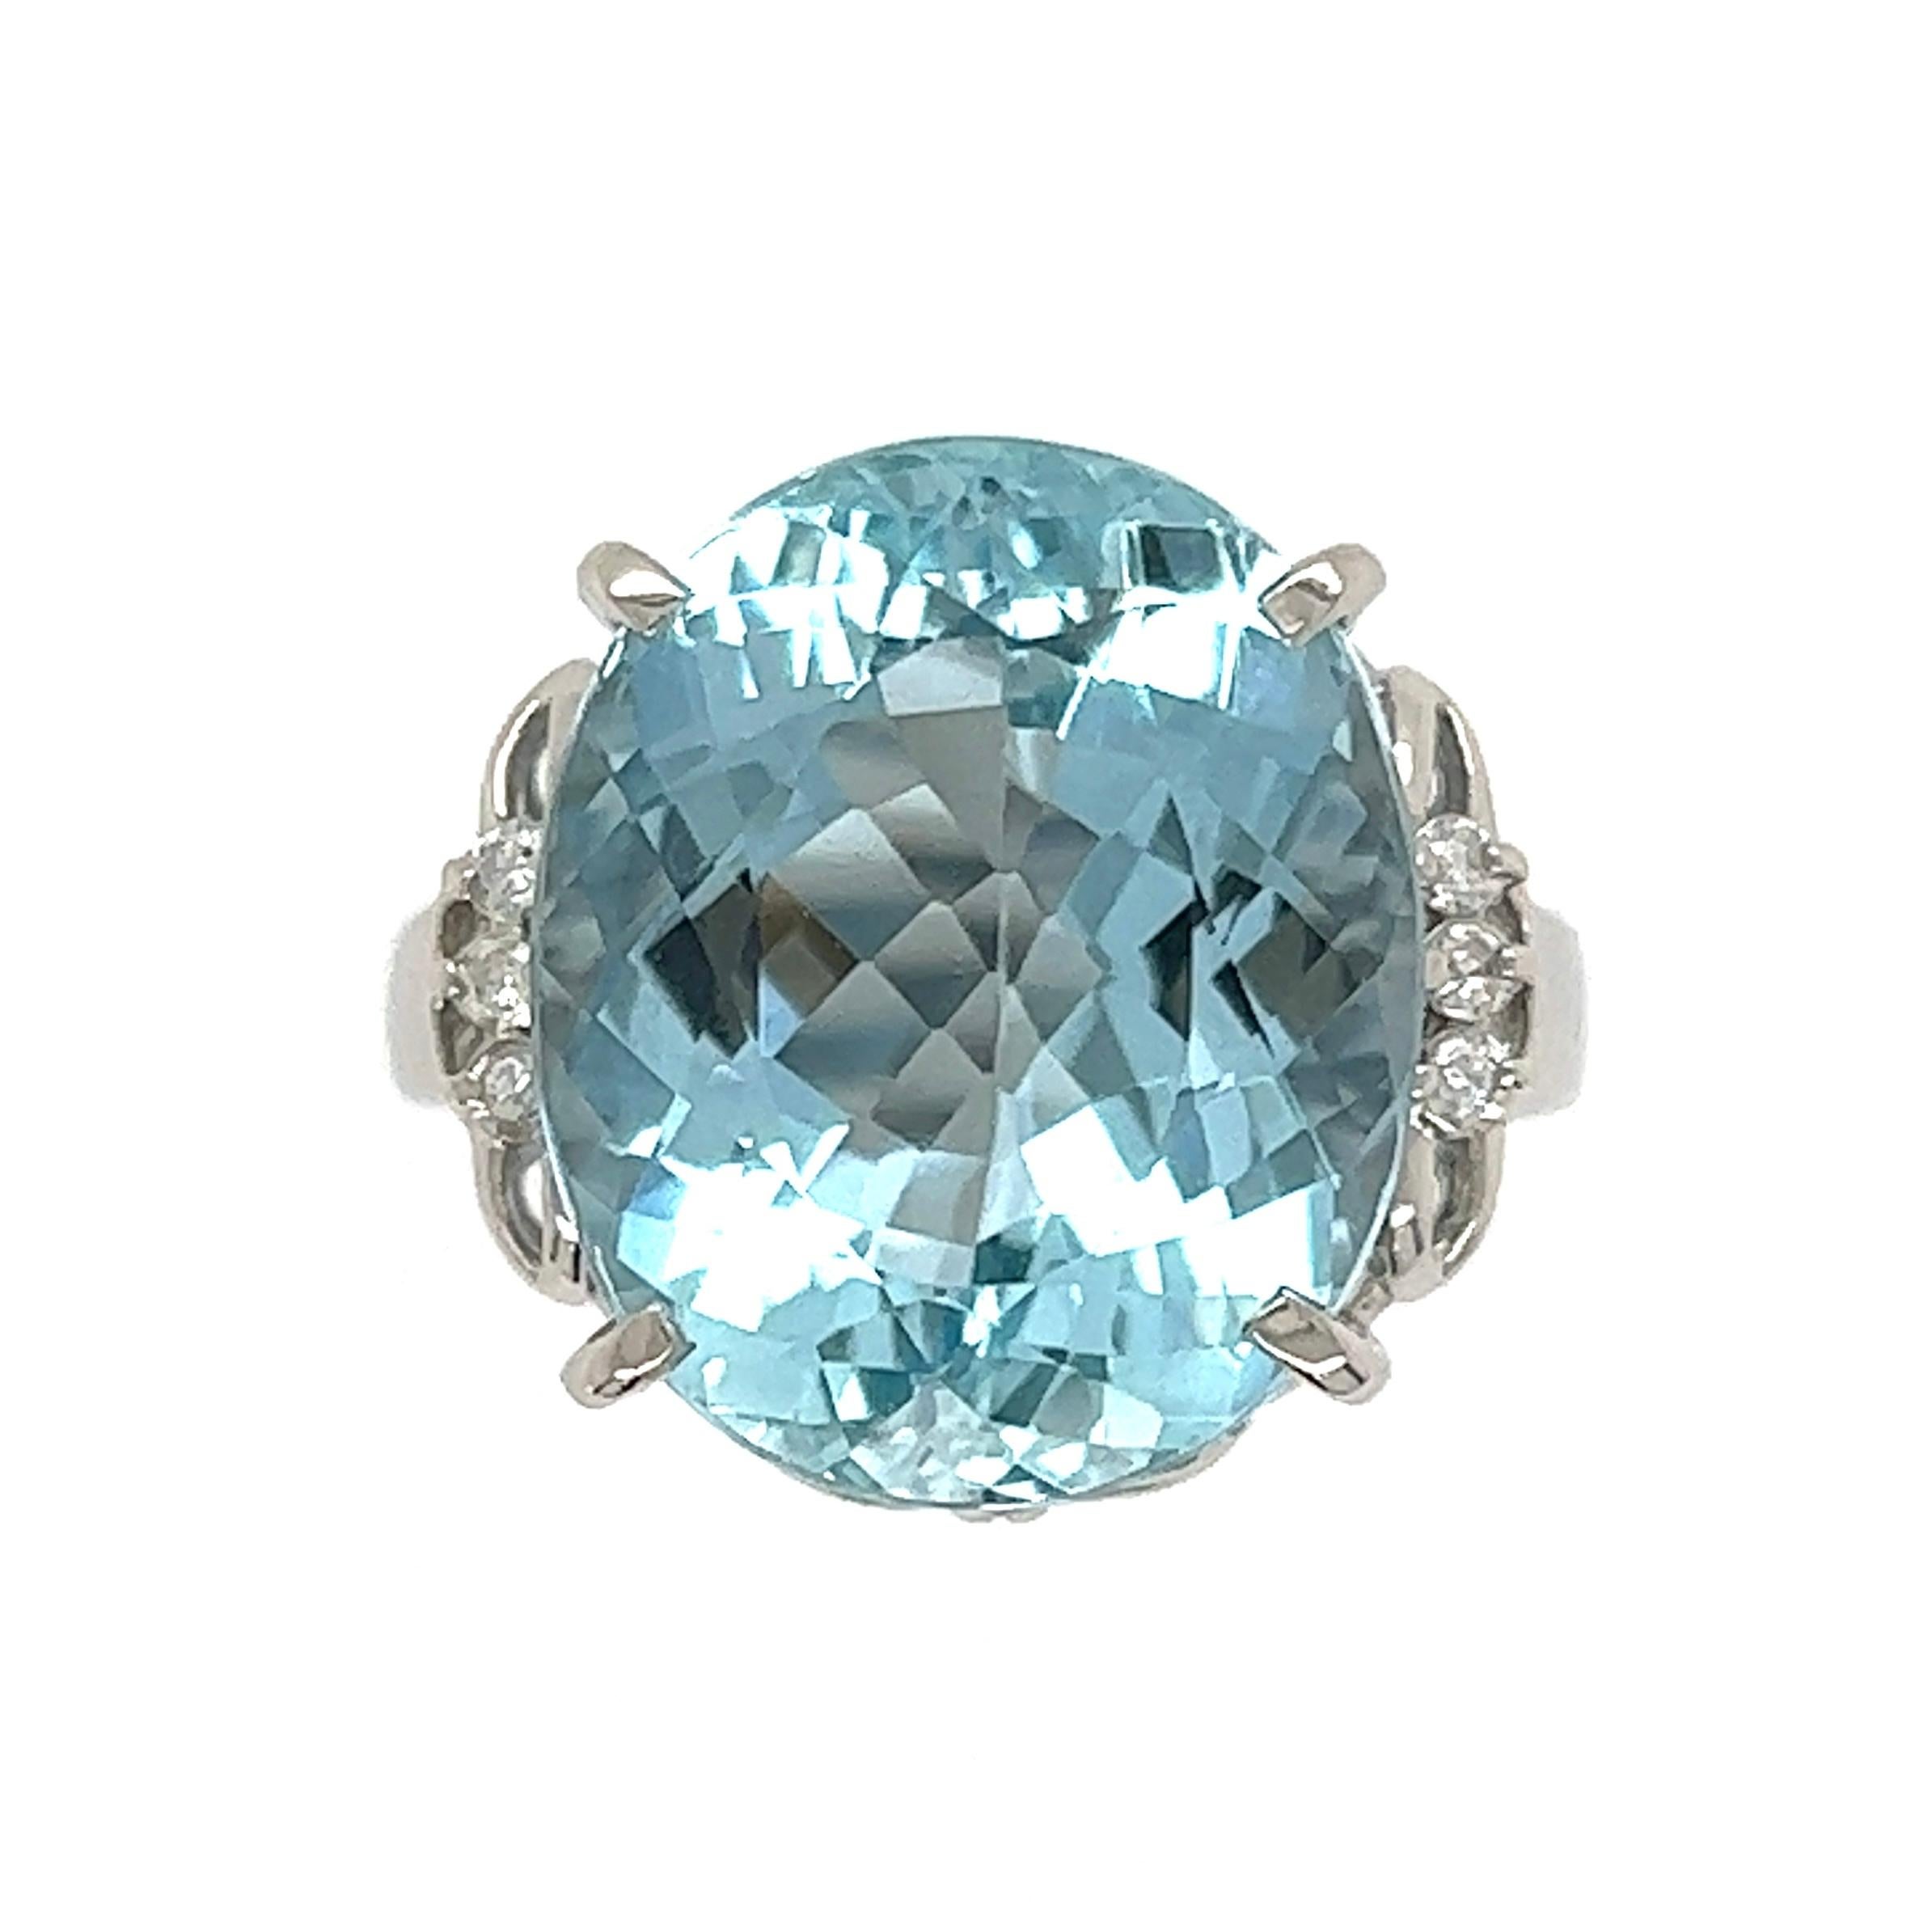 Simply Beautiful! Aquamarine and Diamond Cocktail Ring centering a securely nestled Hand set Oval Aquamarine with Diamonds on either side, weighing approx. 0.08tcw. Hand crafted Platinum mounting. Dimensions: 1.05: l x 0.78” w x 1.10” d x 0.61” h